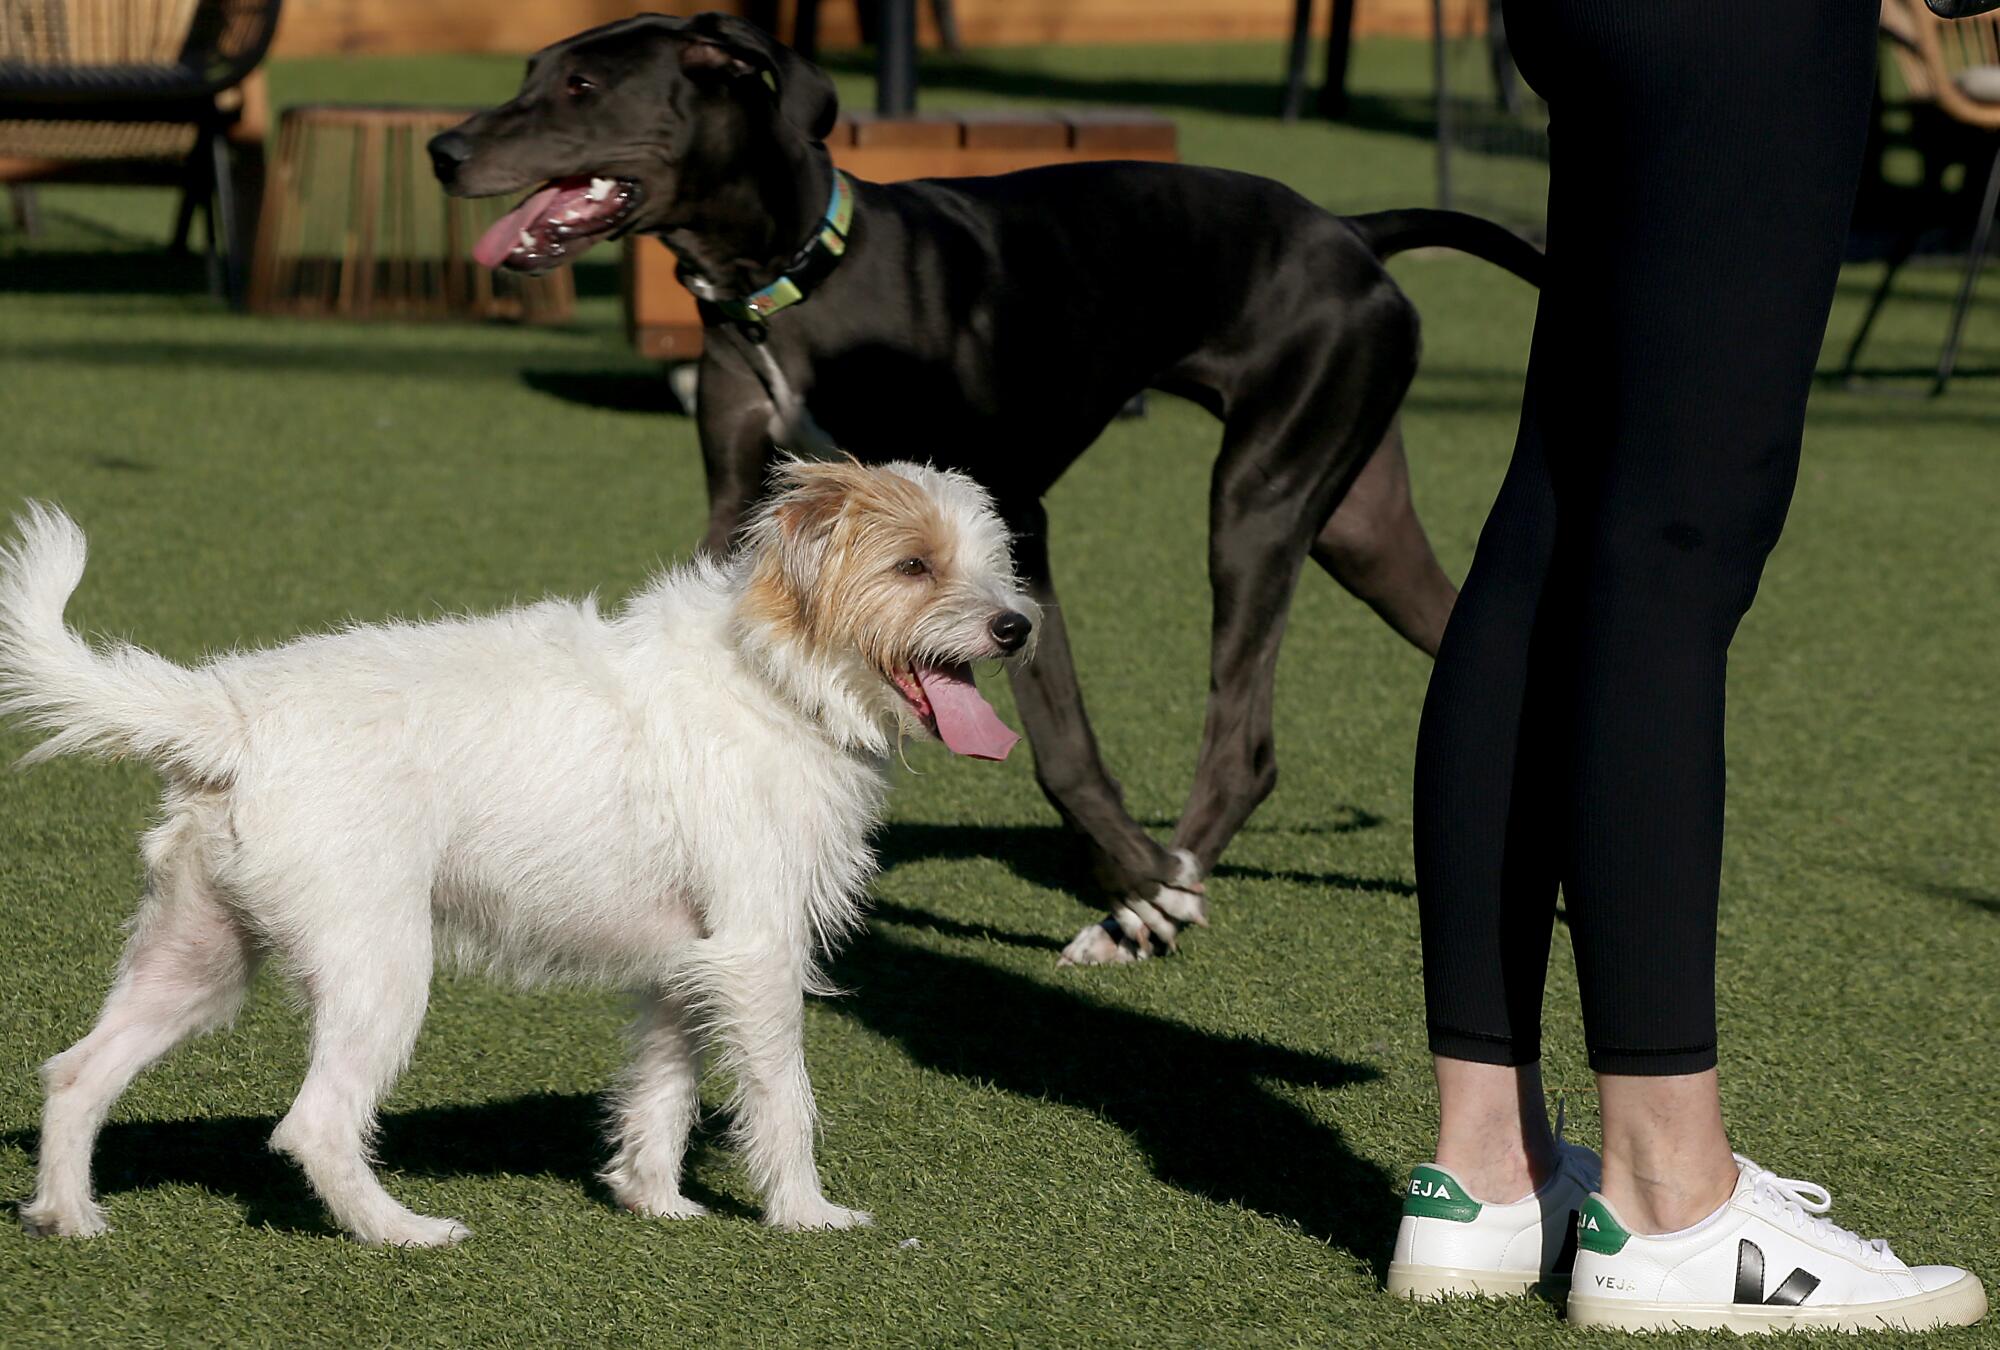 Dogs roam around in a private dog park.